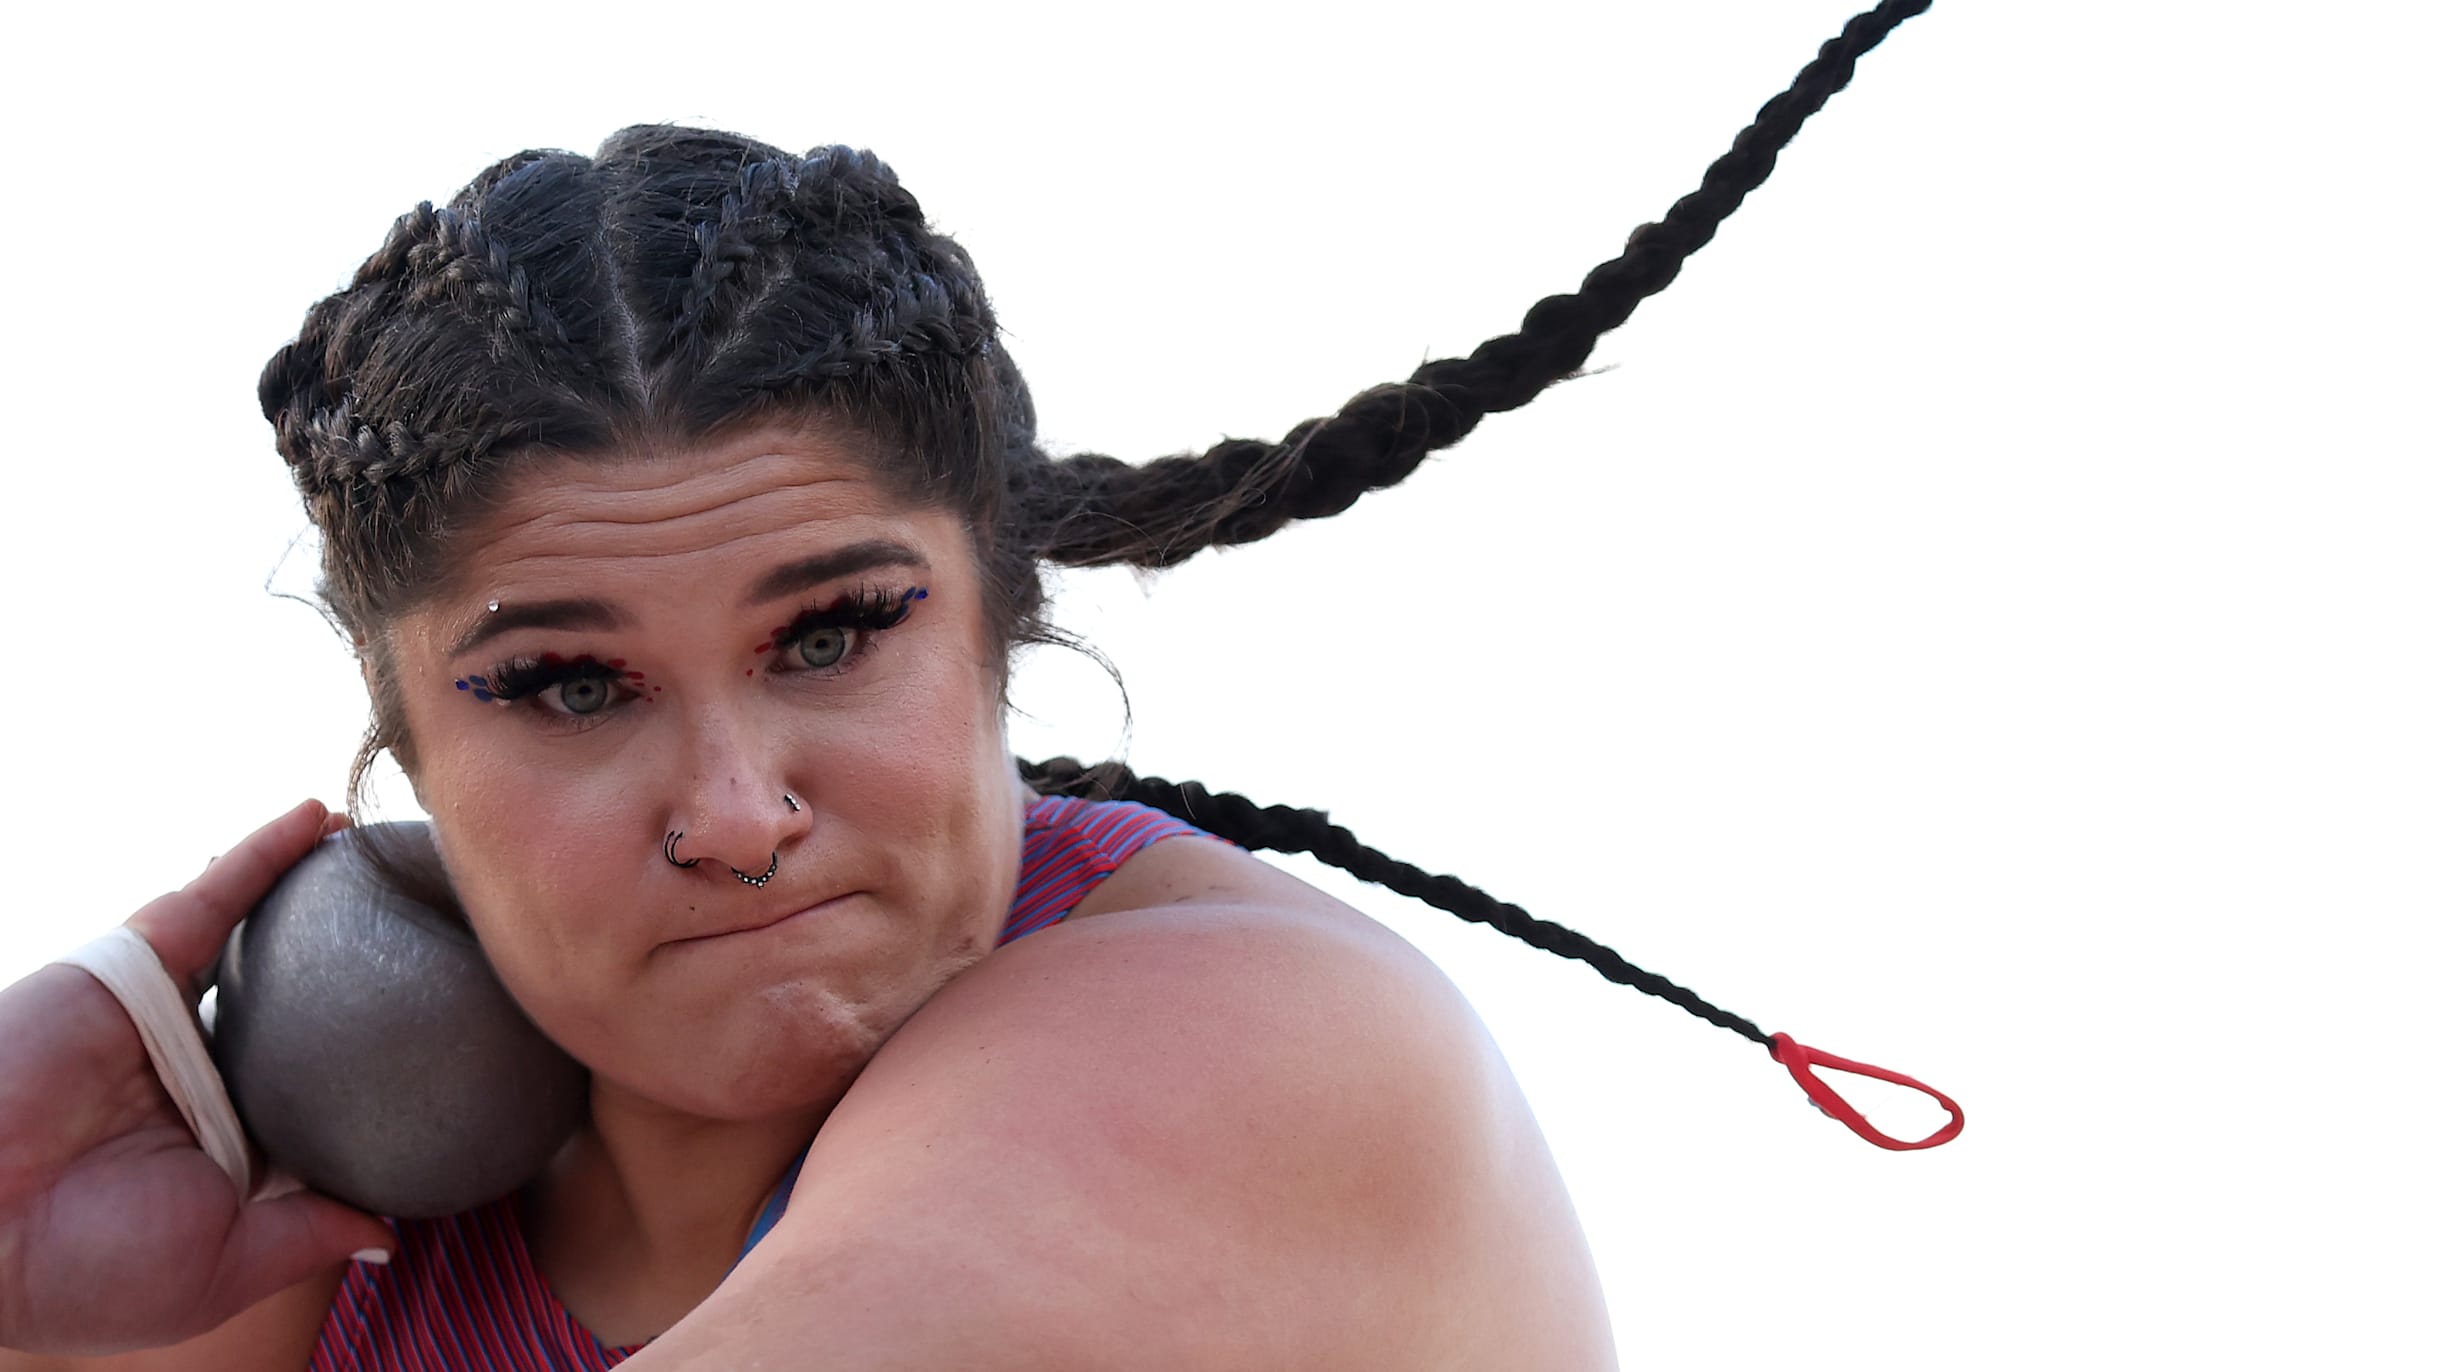 30 Athlete Hairstyles We'll Never Forget (Even If We Try